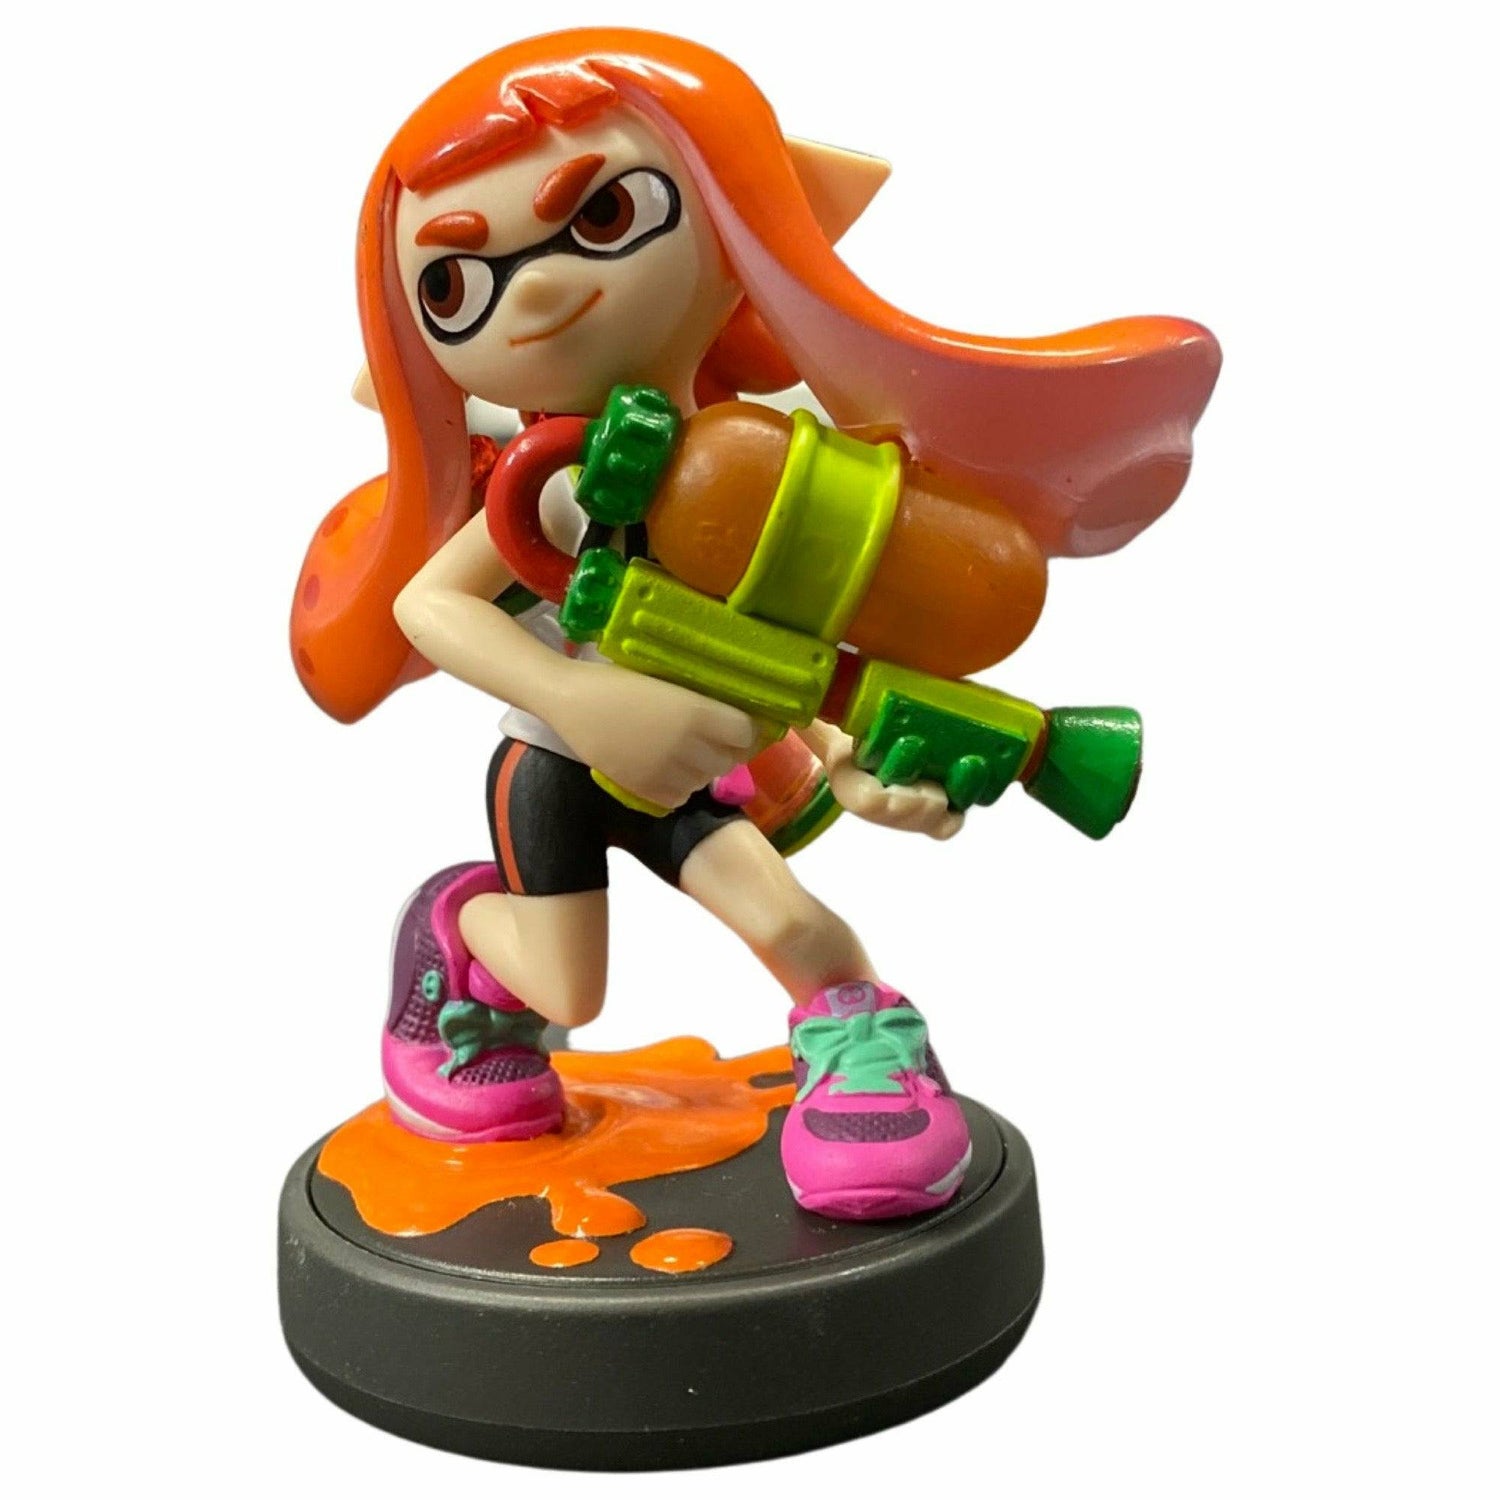 Inkling Girl Splatoon Series Amiibo Best New And Retro Video Games Consoles Accessories 